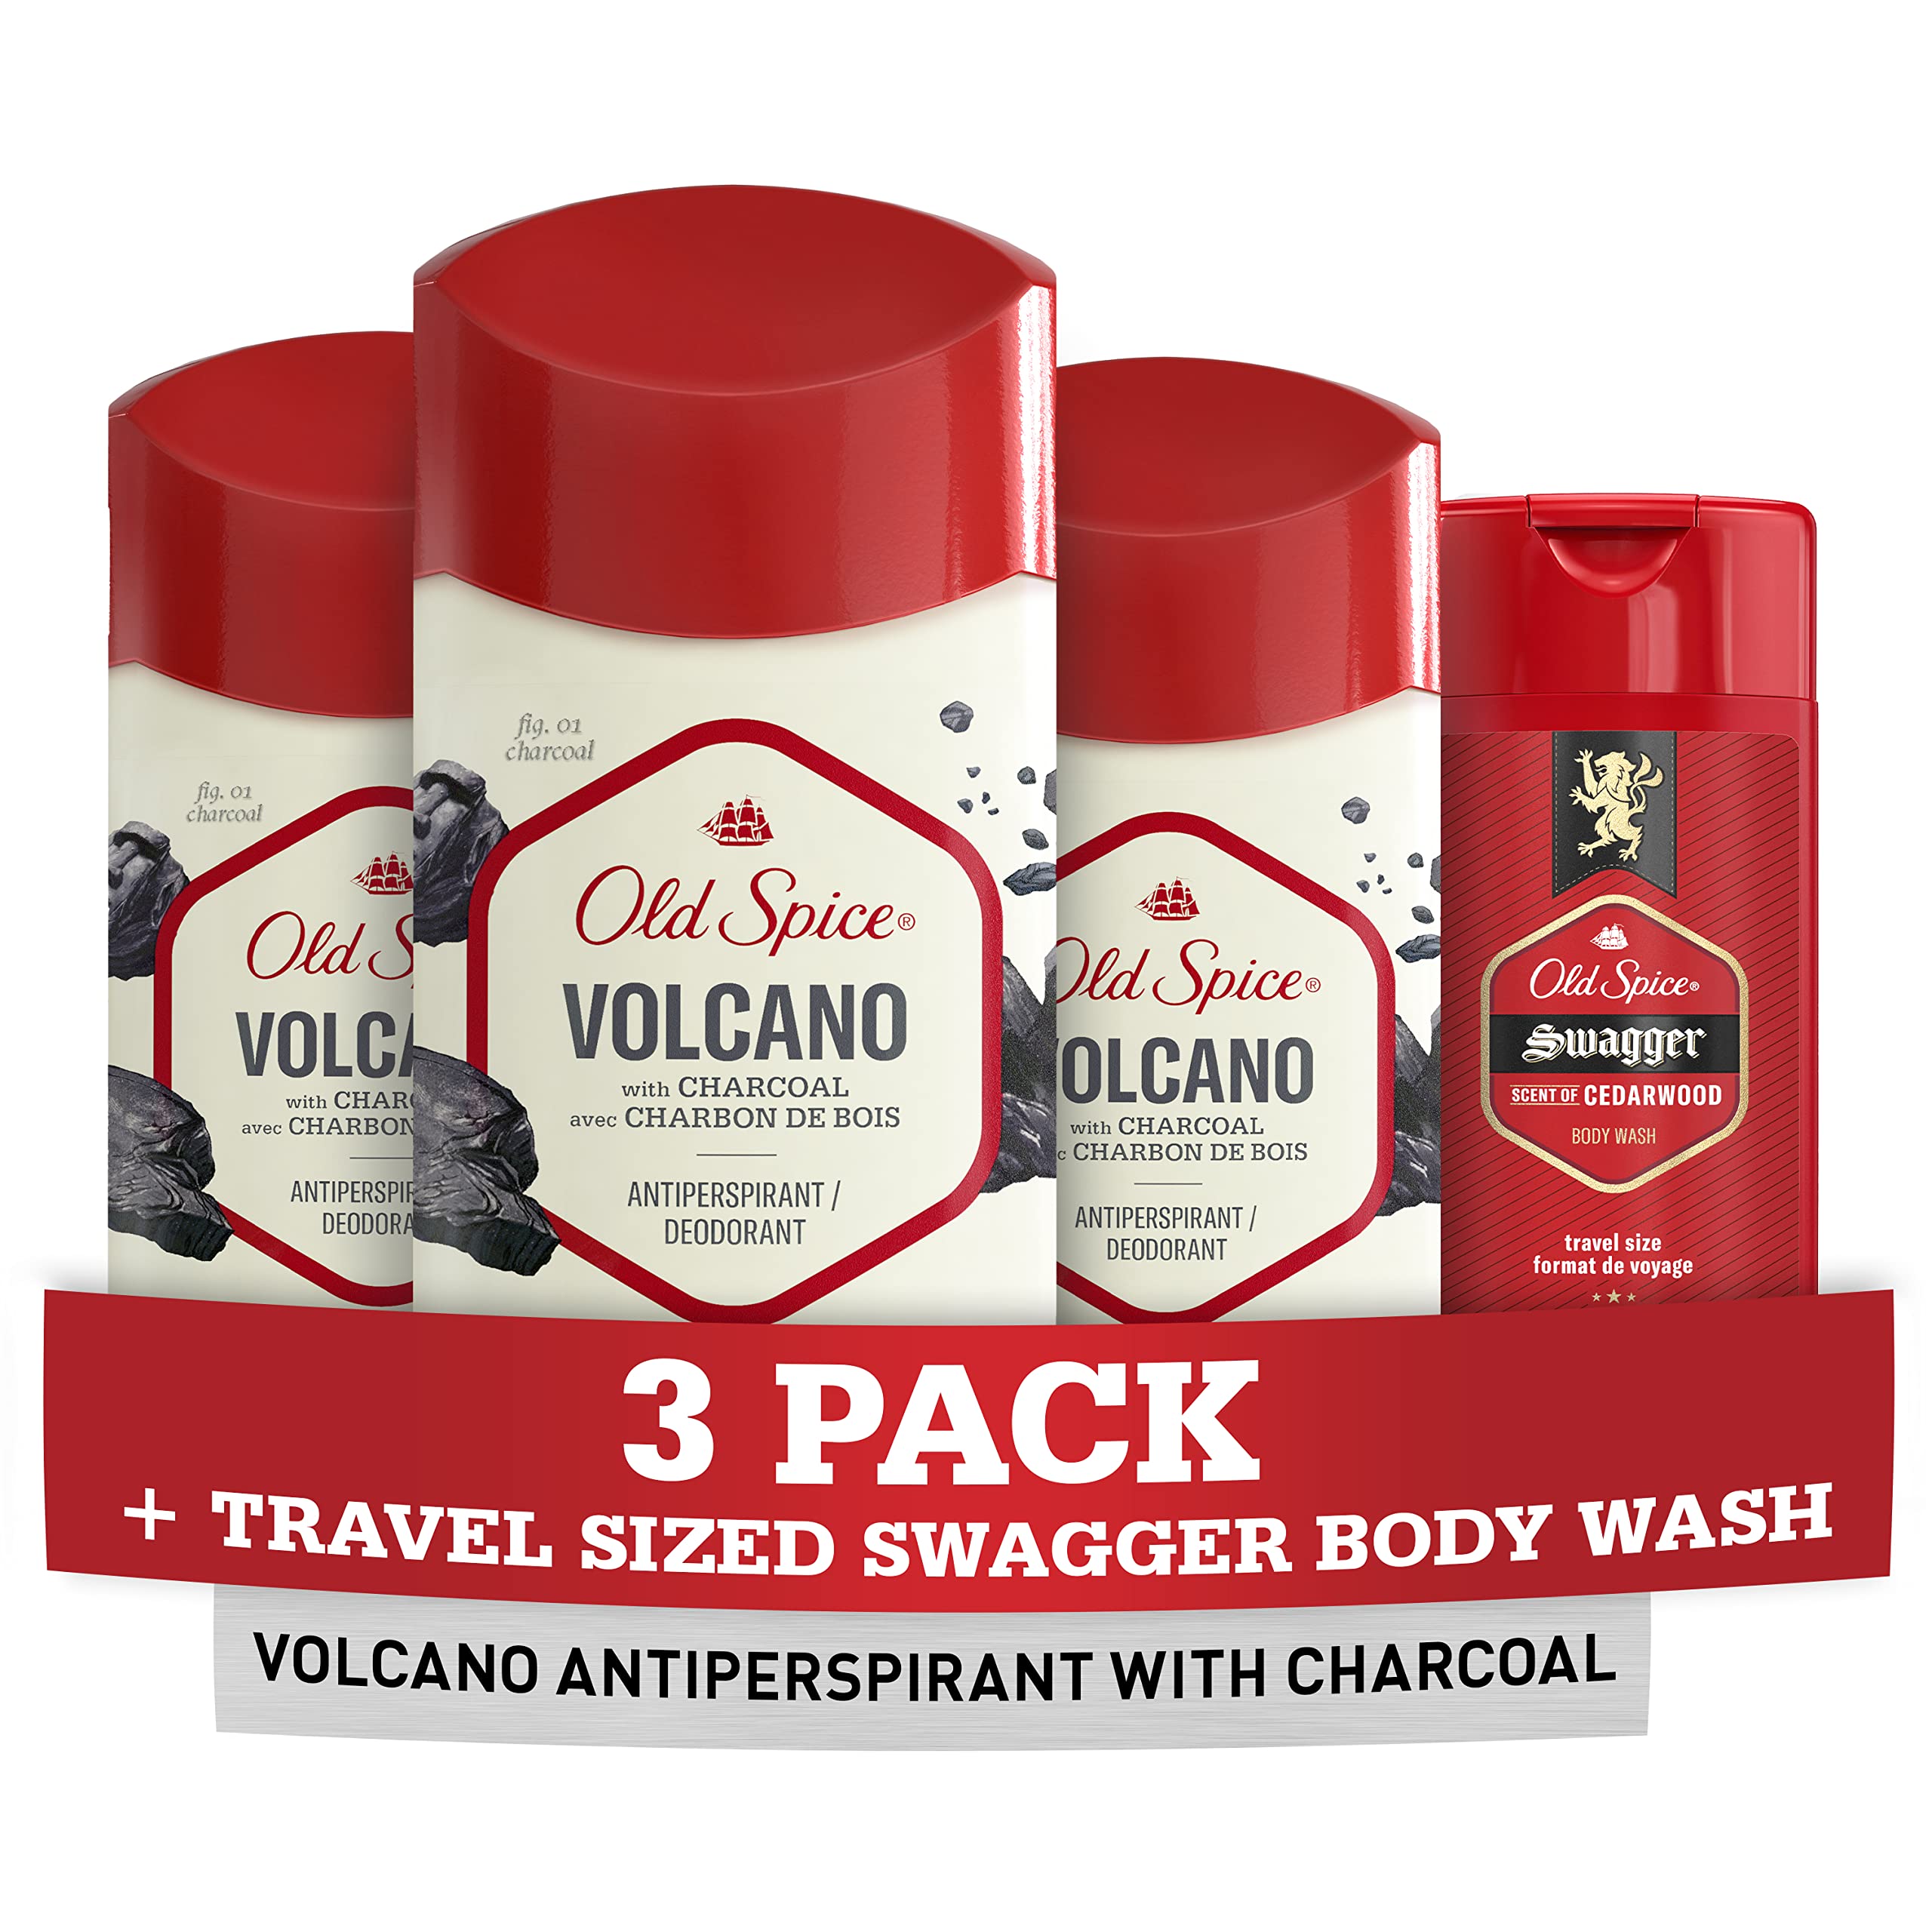 Old Spice Men's Antiperspirant & Deodorant Volcano with Charcoal, 2.6oz Pack of 3 with Travel-Size Swagger Body Wash